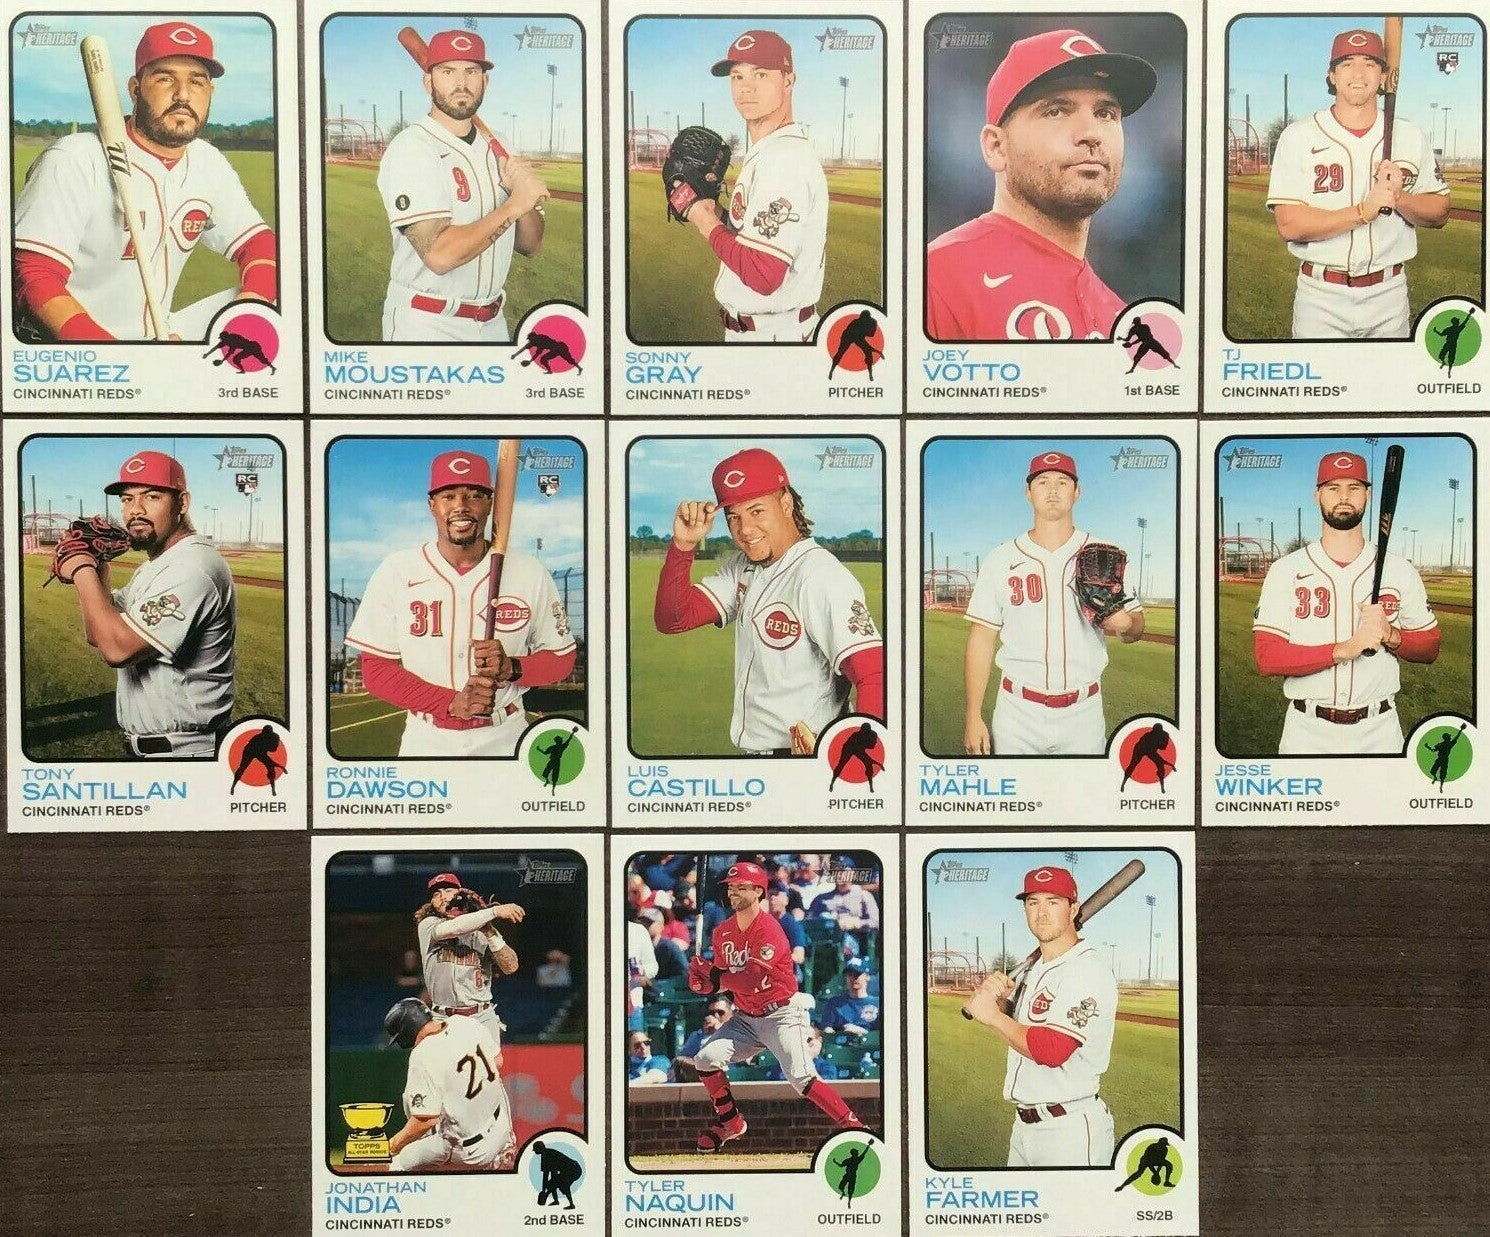 Cincinnati Reds / 2023 Topps Reds Baseball Team Set (Series 1 and 2) with  (21) Cards. PLUS the 2022 Topps Reds Baseball Team Set (Series 1 and 2)  with